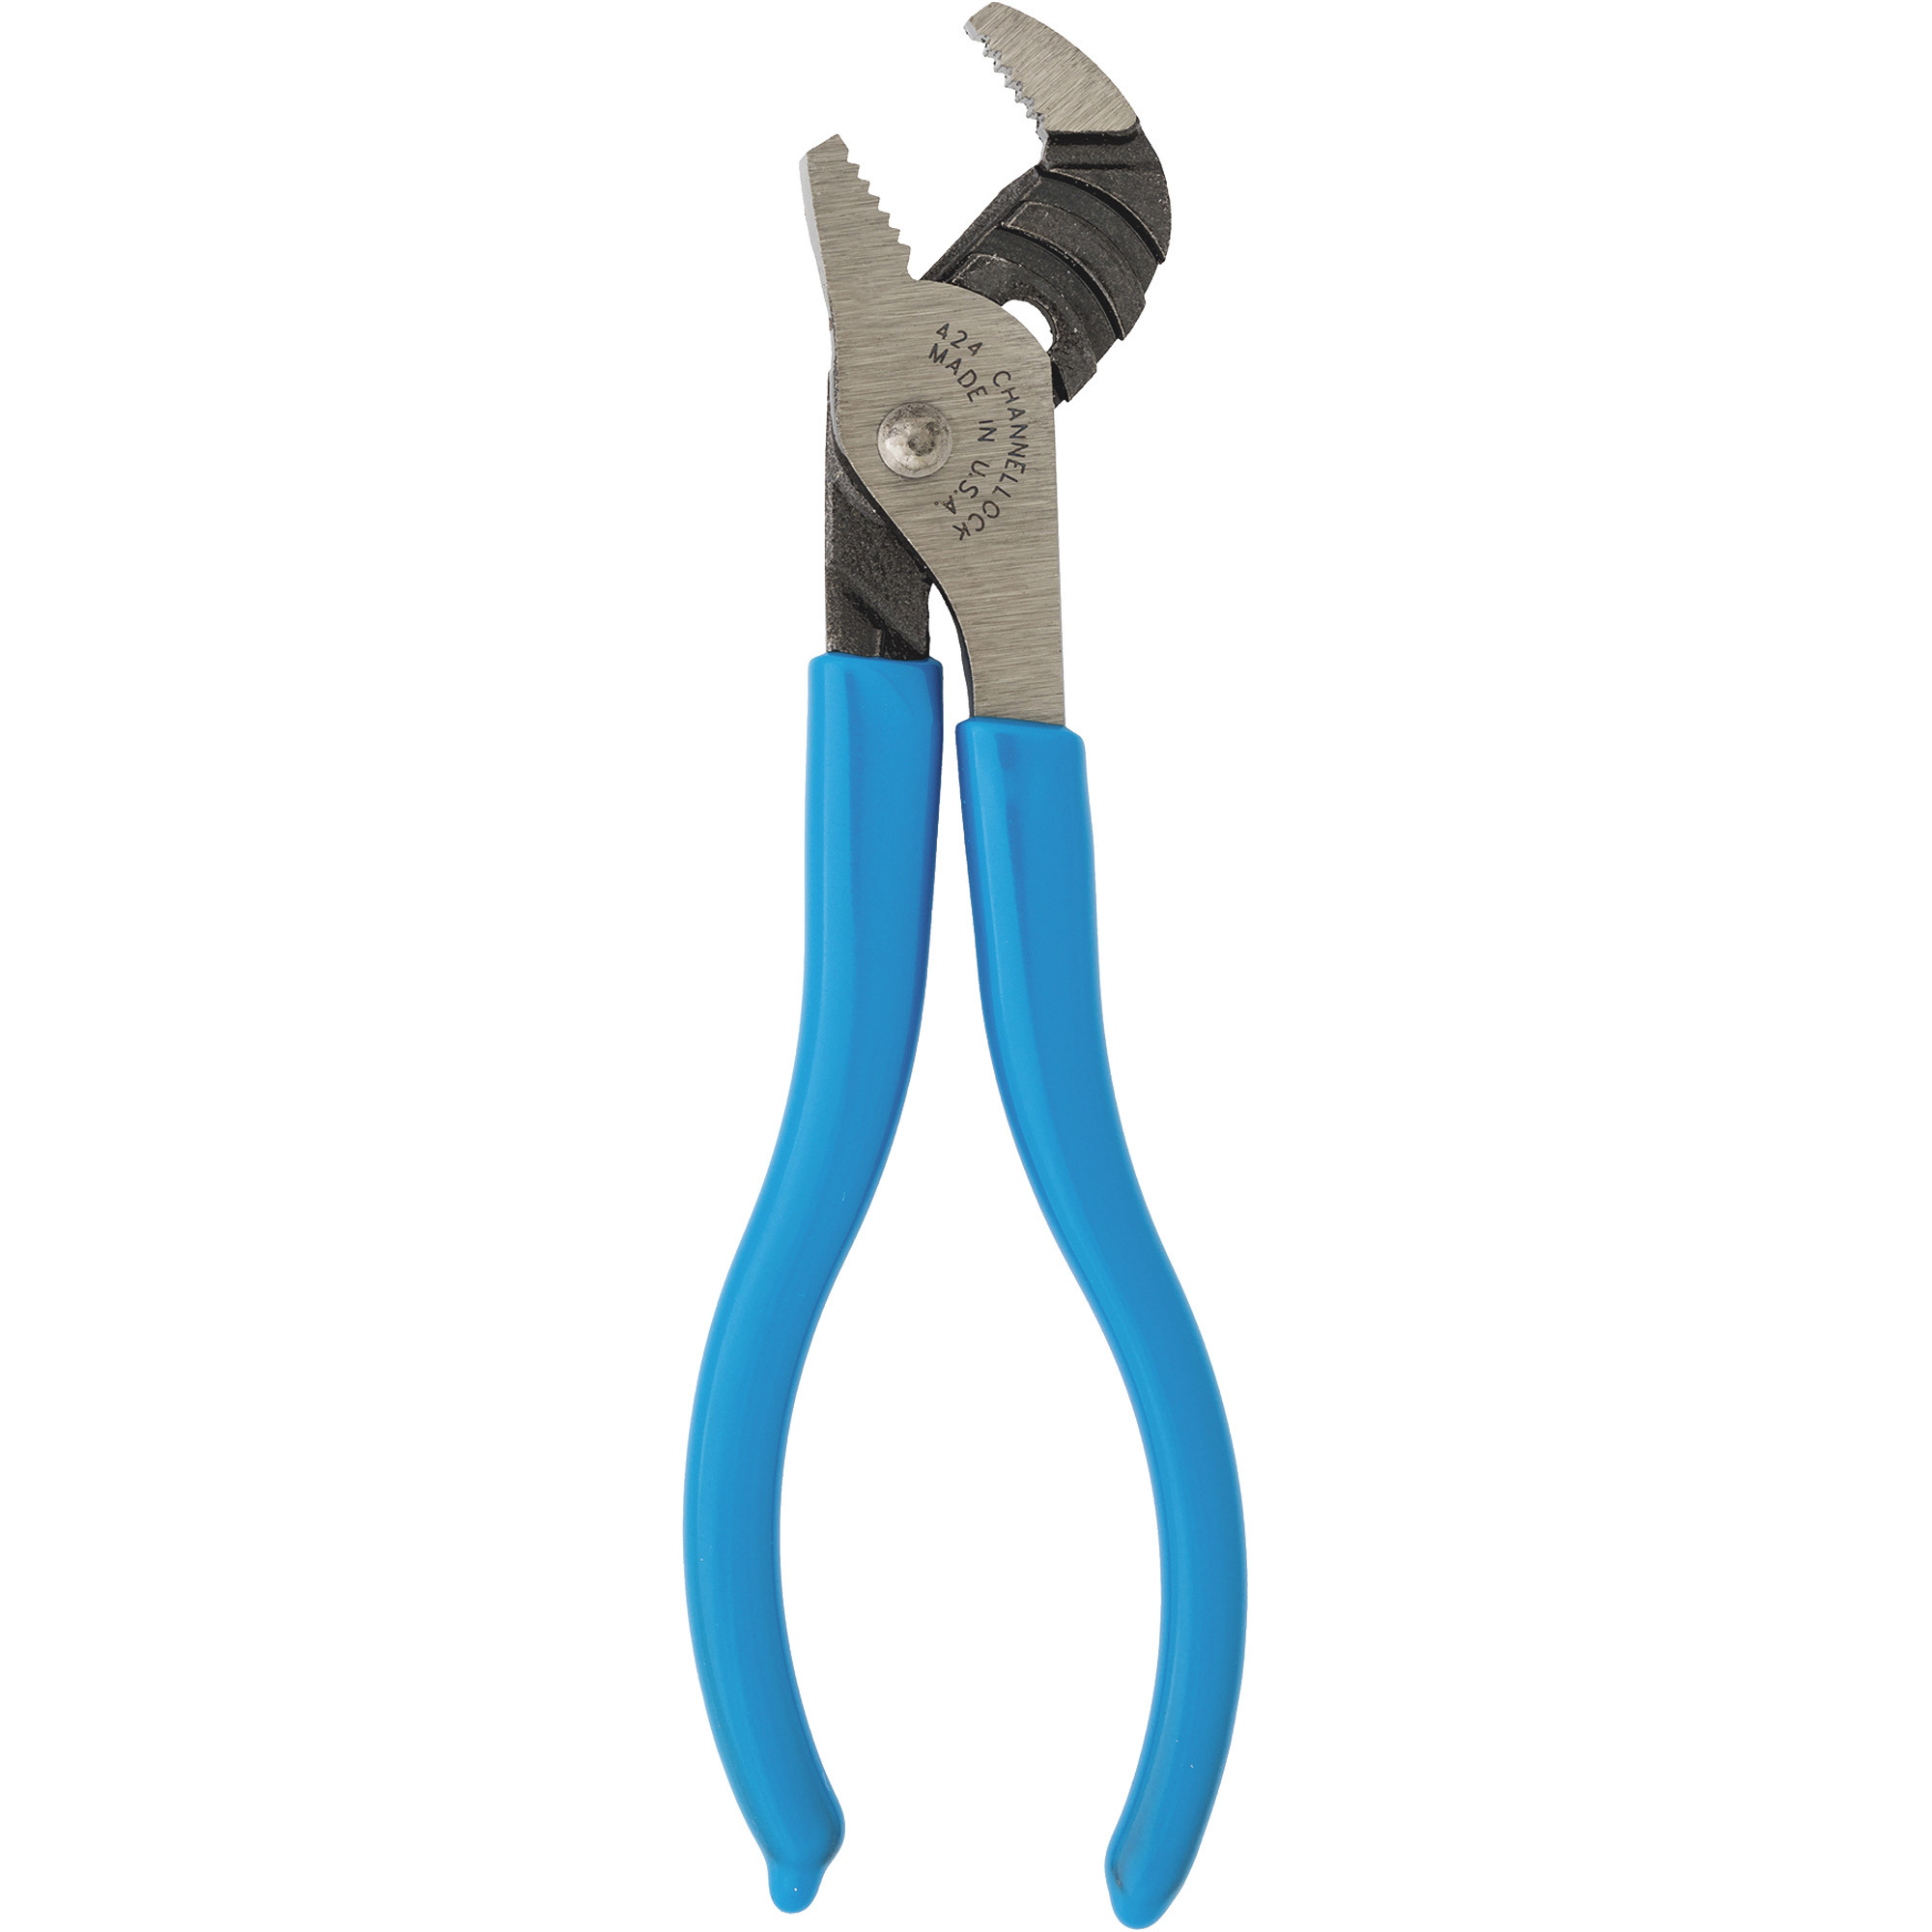 Channellock Tongue and Groove Pliers with SafeTStop â 4 1/2Inch Length, Model 424